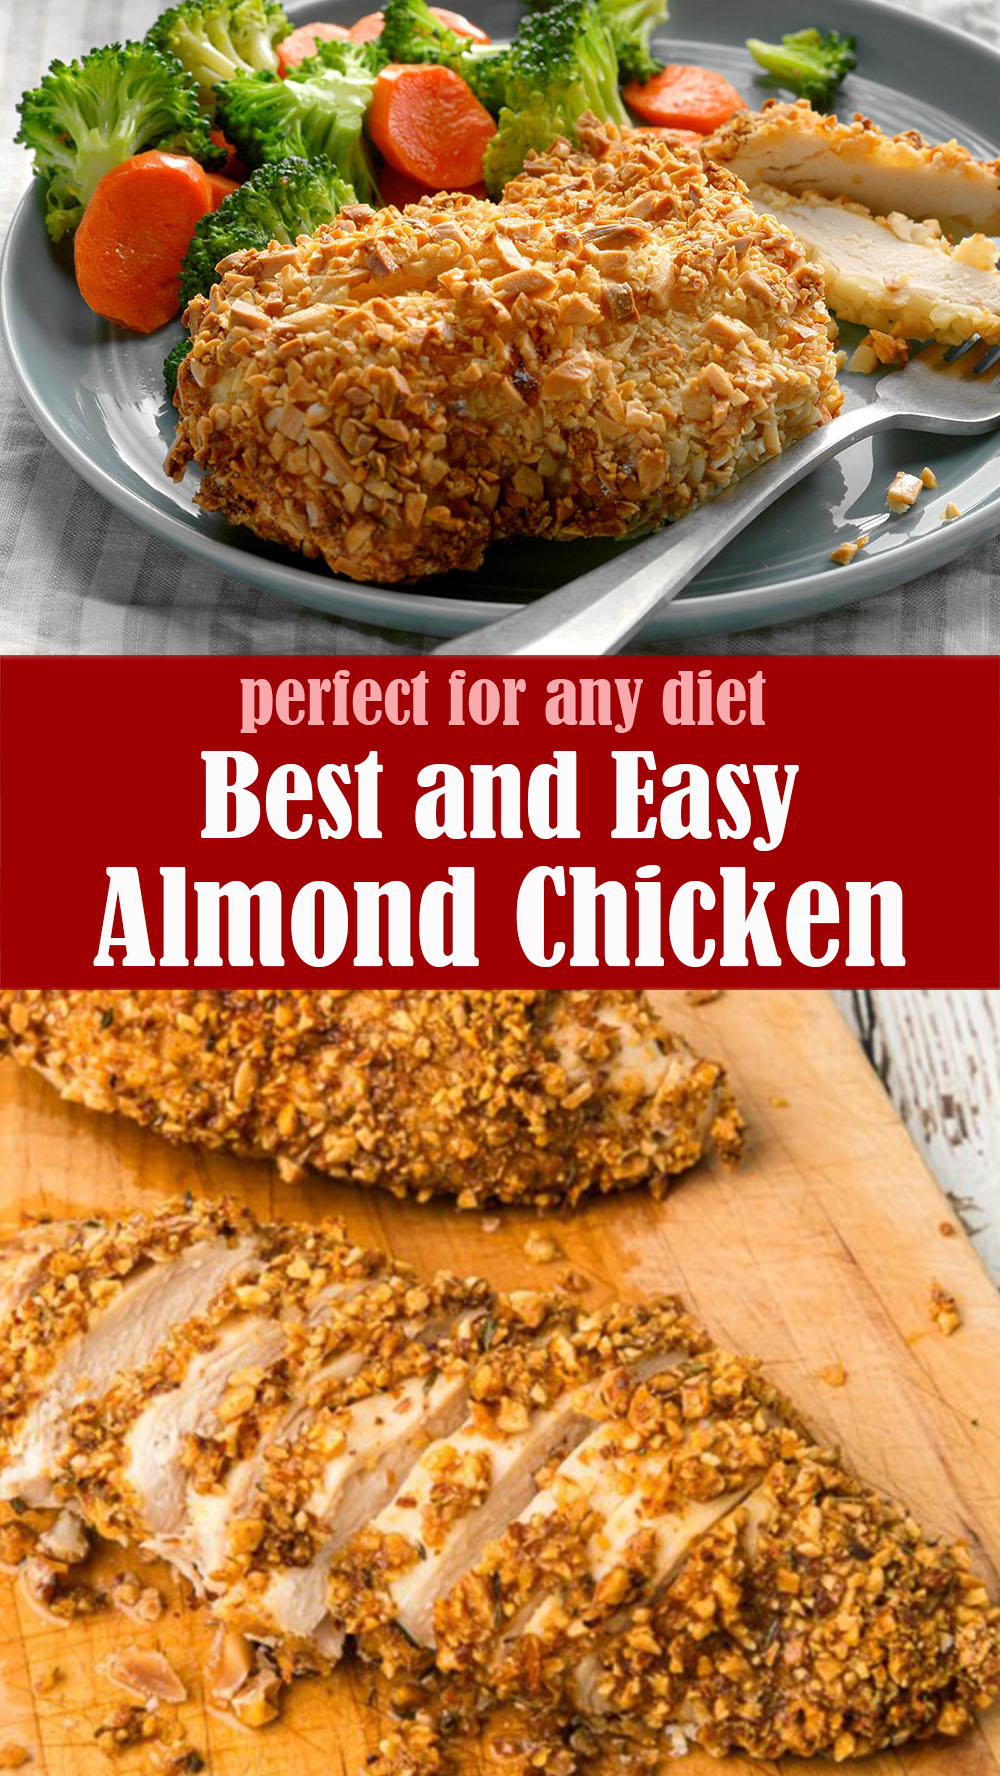 Best and Easy Almond Chicken